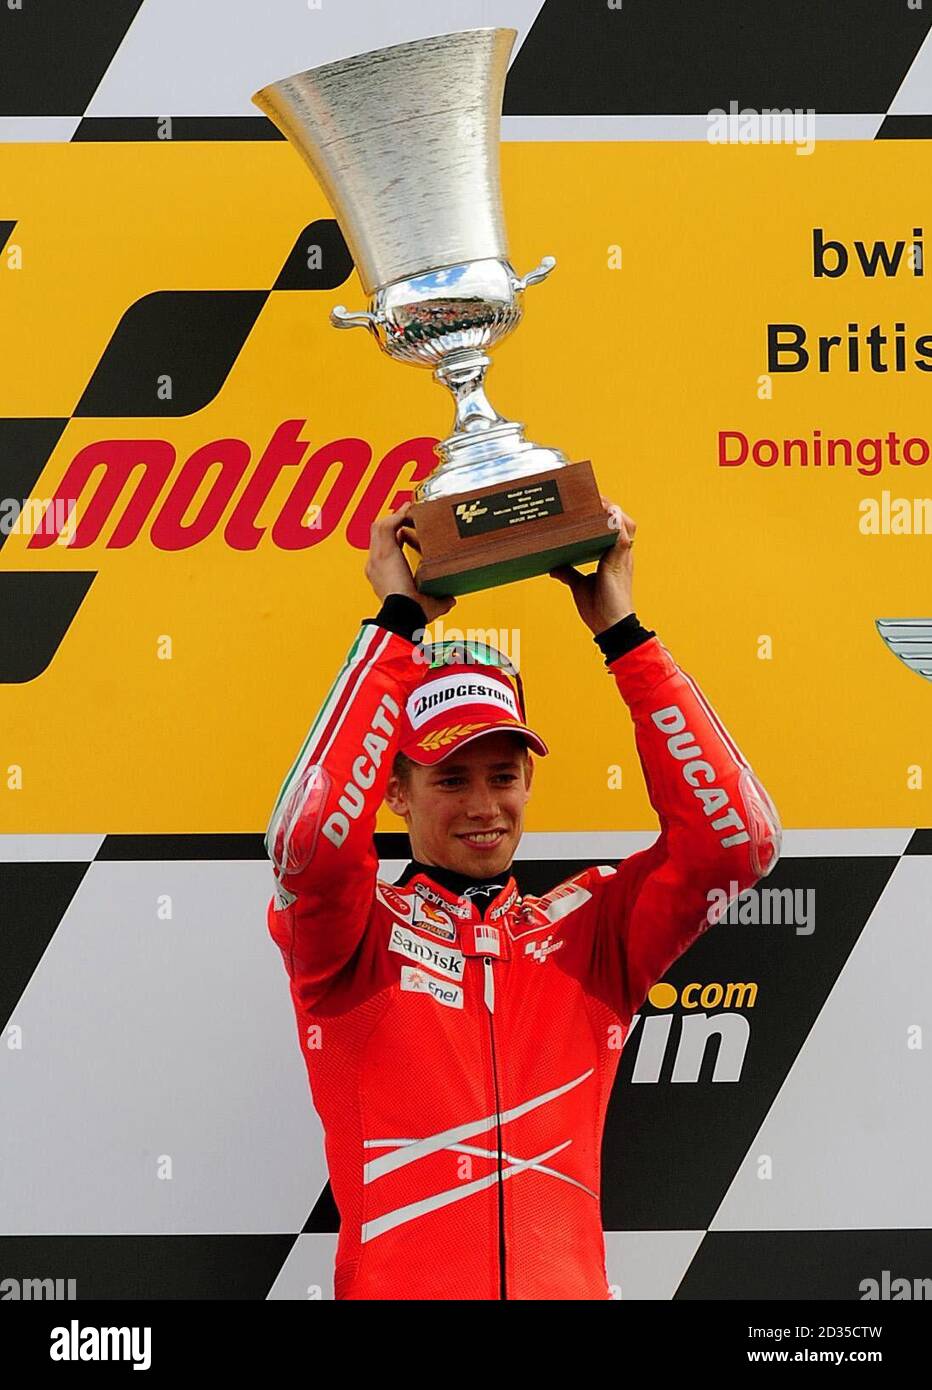 Ducati's Casey Stoner celebrates with trophy after winning the bwin.com British Motorcycle Grand Prix at Donington Park. Stock Photo